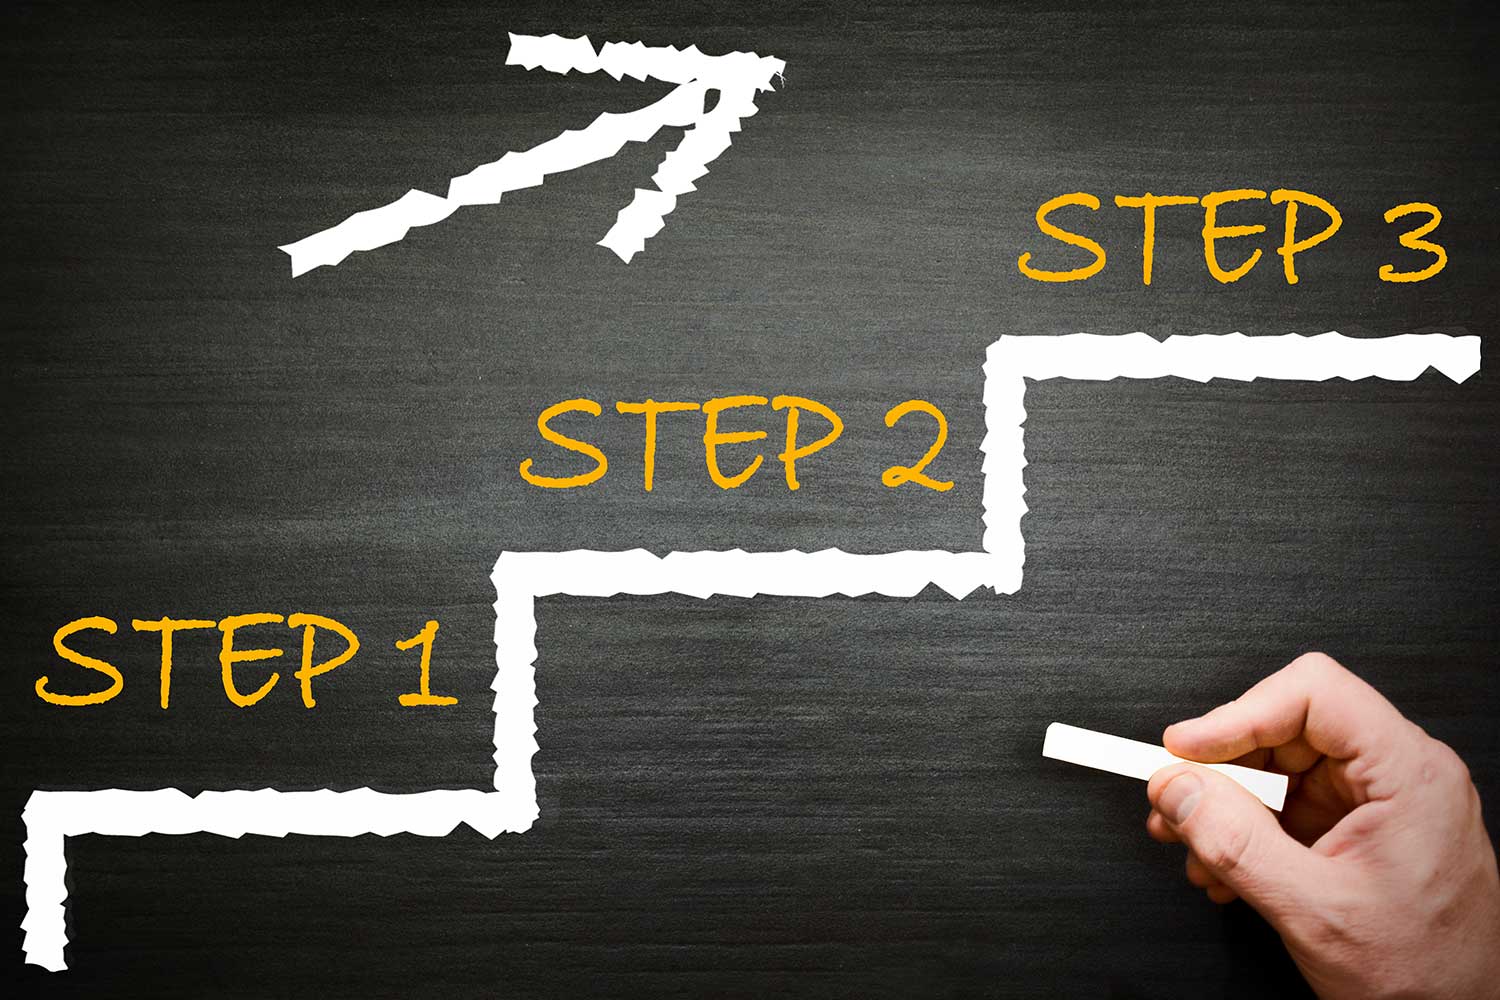 A graphic showing three steps drawn on a chalkboard in the form of stairs.